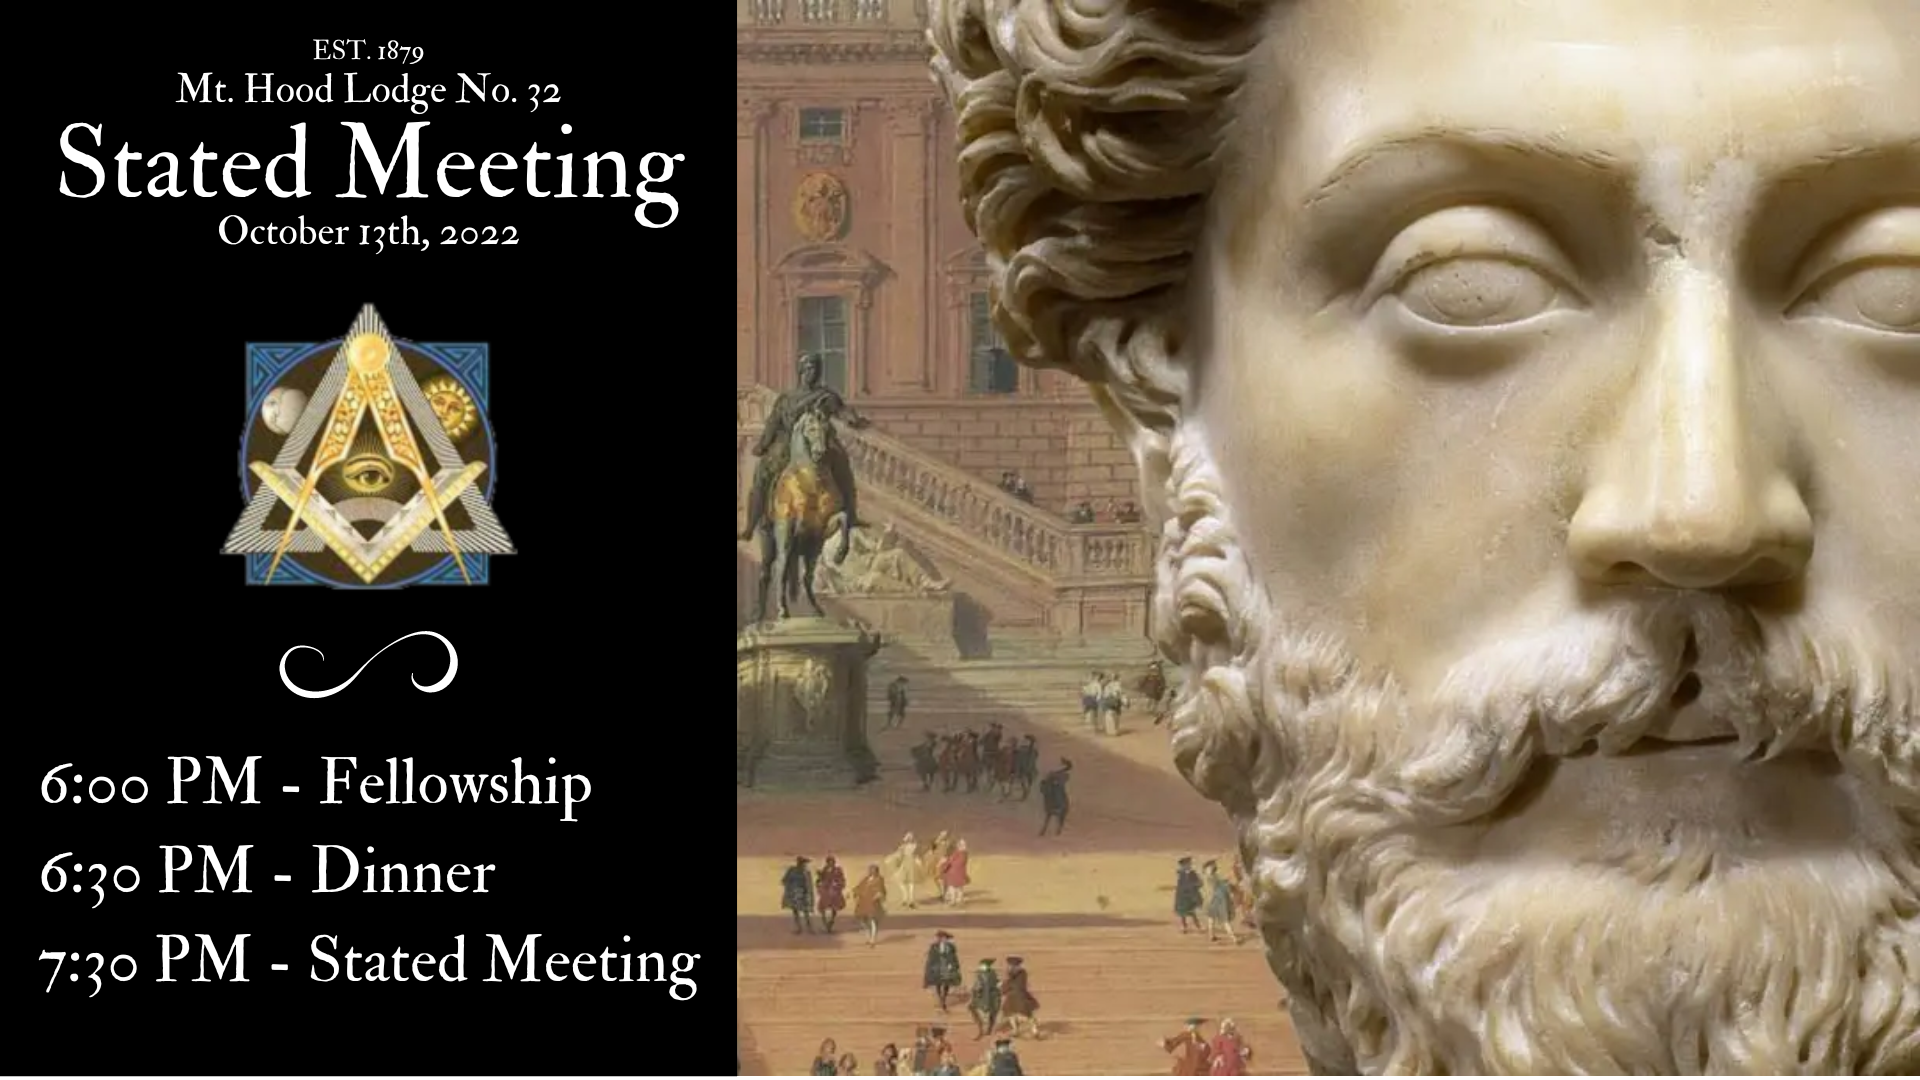 Stated Meeting – Oct. 13th, 2022